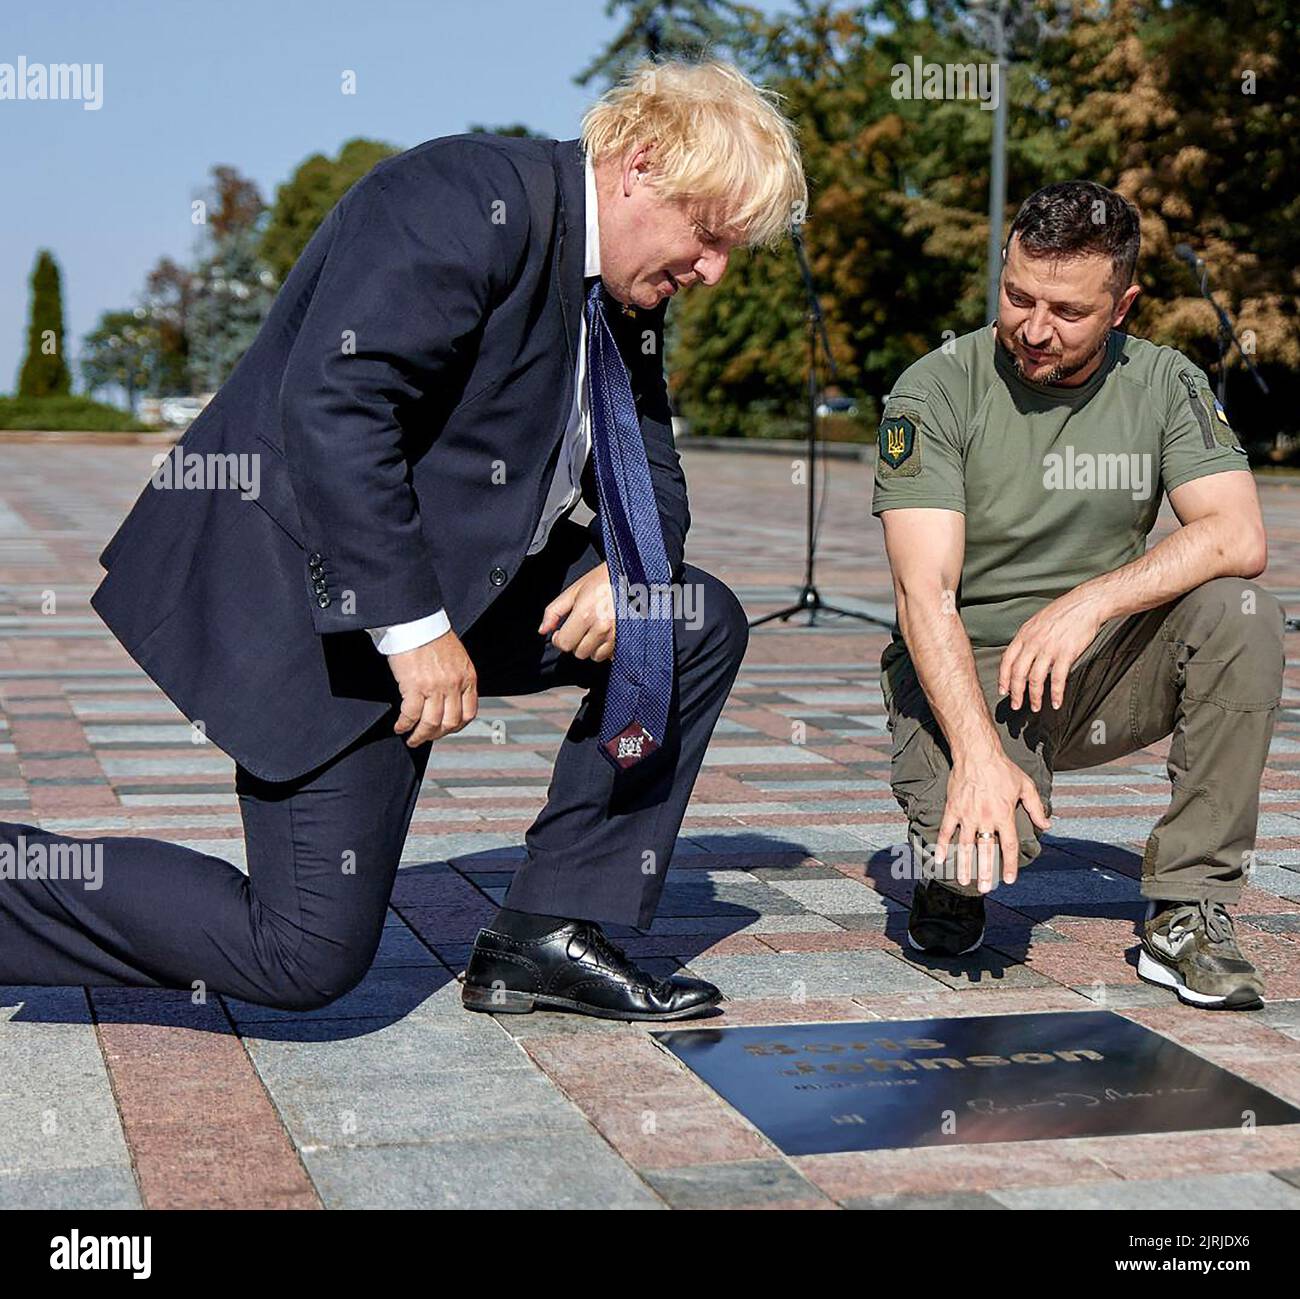 Kyiv, Ukraine. 24th Aug, 2022. Ukrainian President Volodymyr Zelensky (R) shows British Prime Minister Boris Johnson (L) his name engraved on a plaque inaugurated at the Ally of Bravery on Ukraine's Independence Day Wednesday on August 24, 2022, amid Russia's invasion of Ukraine. Photo by Ukrainian President Press Office/UPI Credit: UPI/Alamy Live News Stock Photo